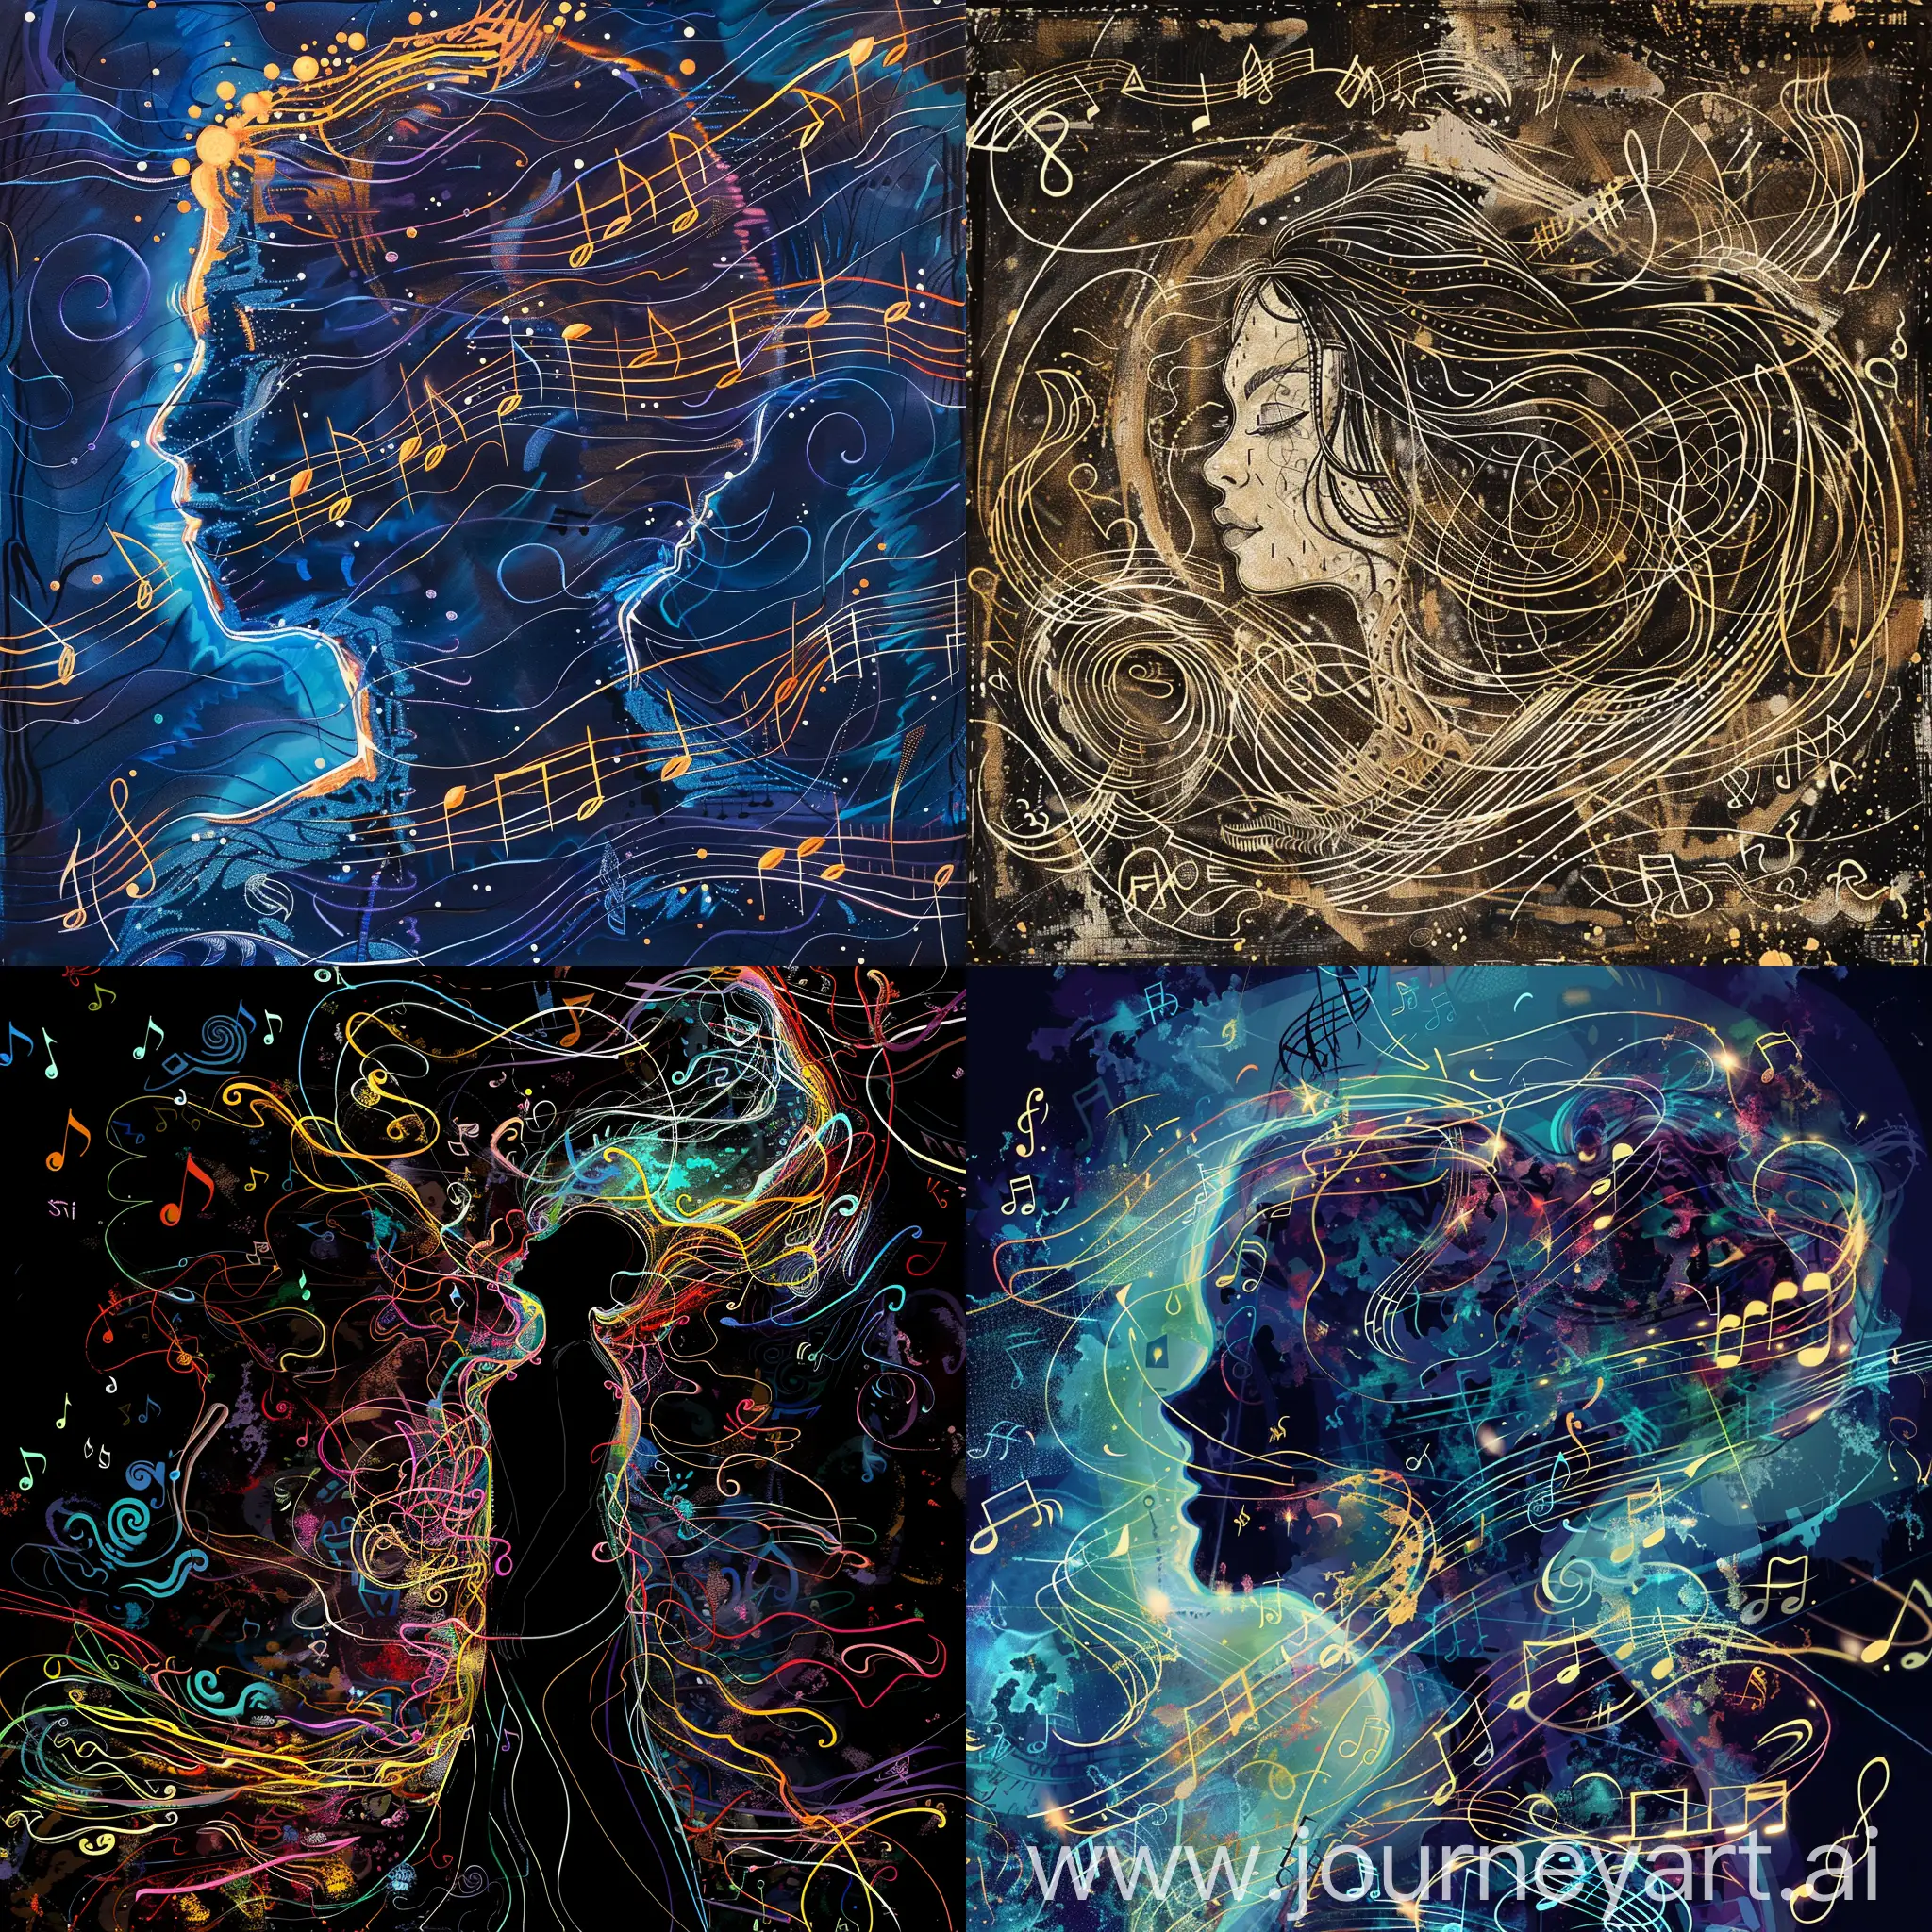 abstract music album artwork, female person outlines or loom surrounded by music waves and notes